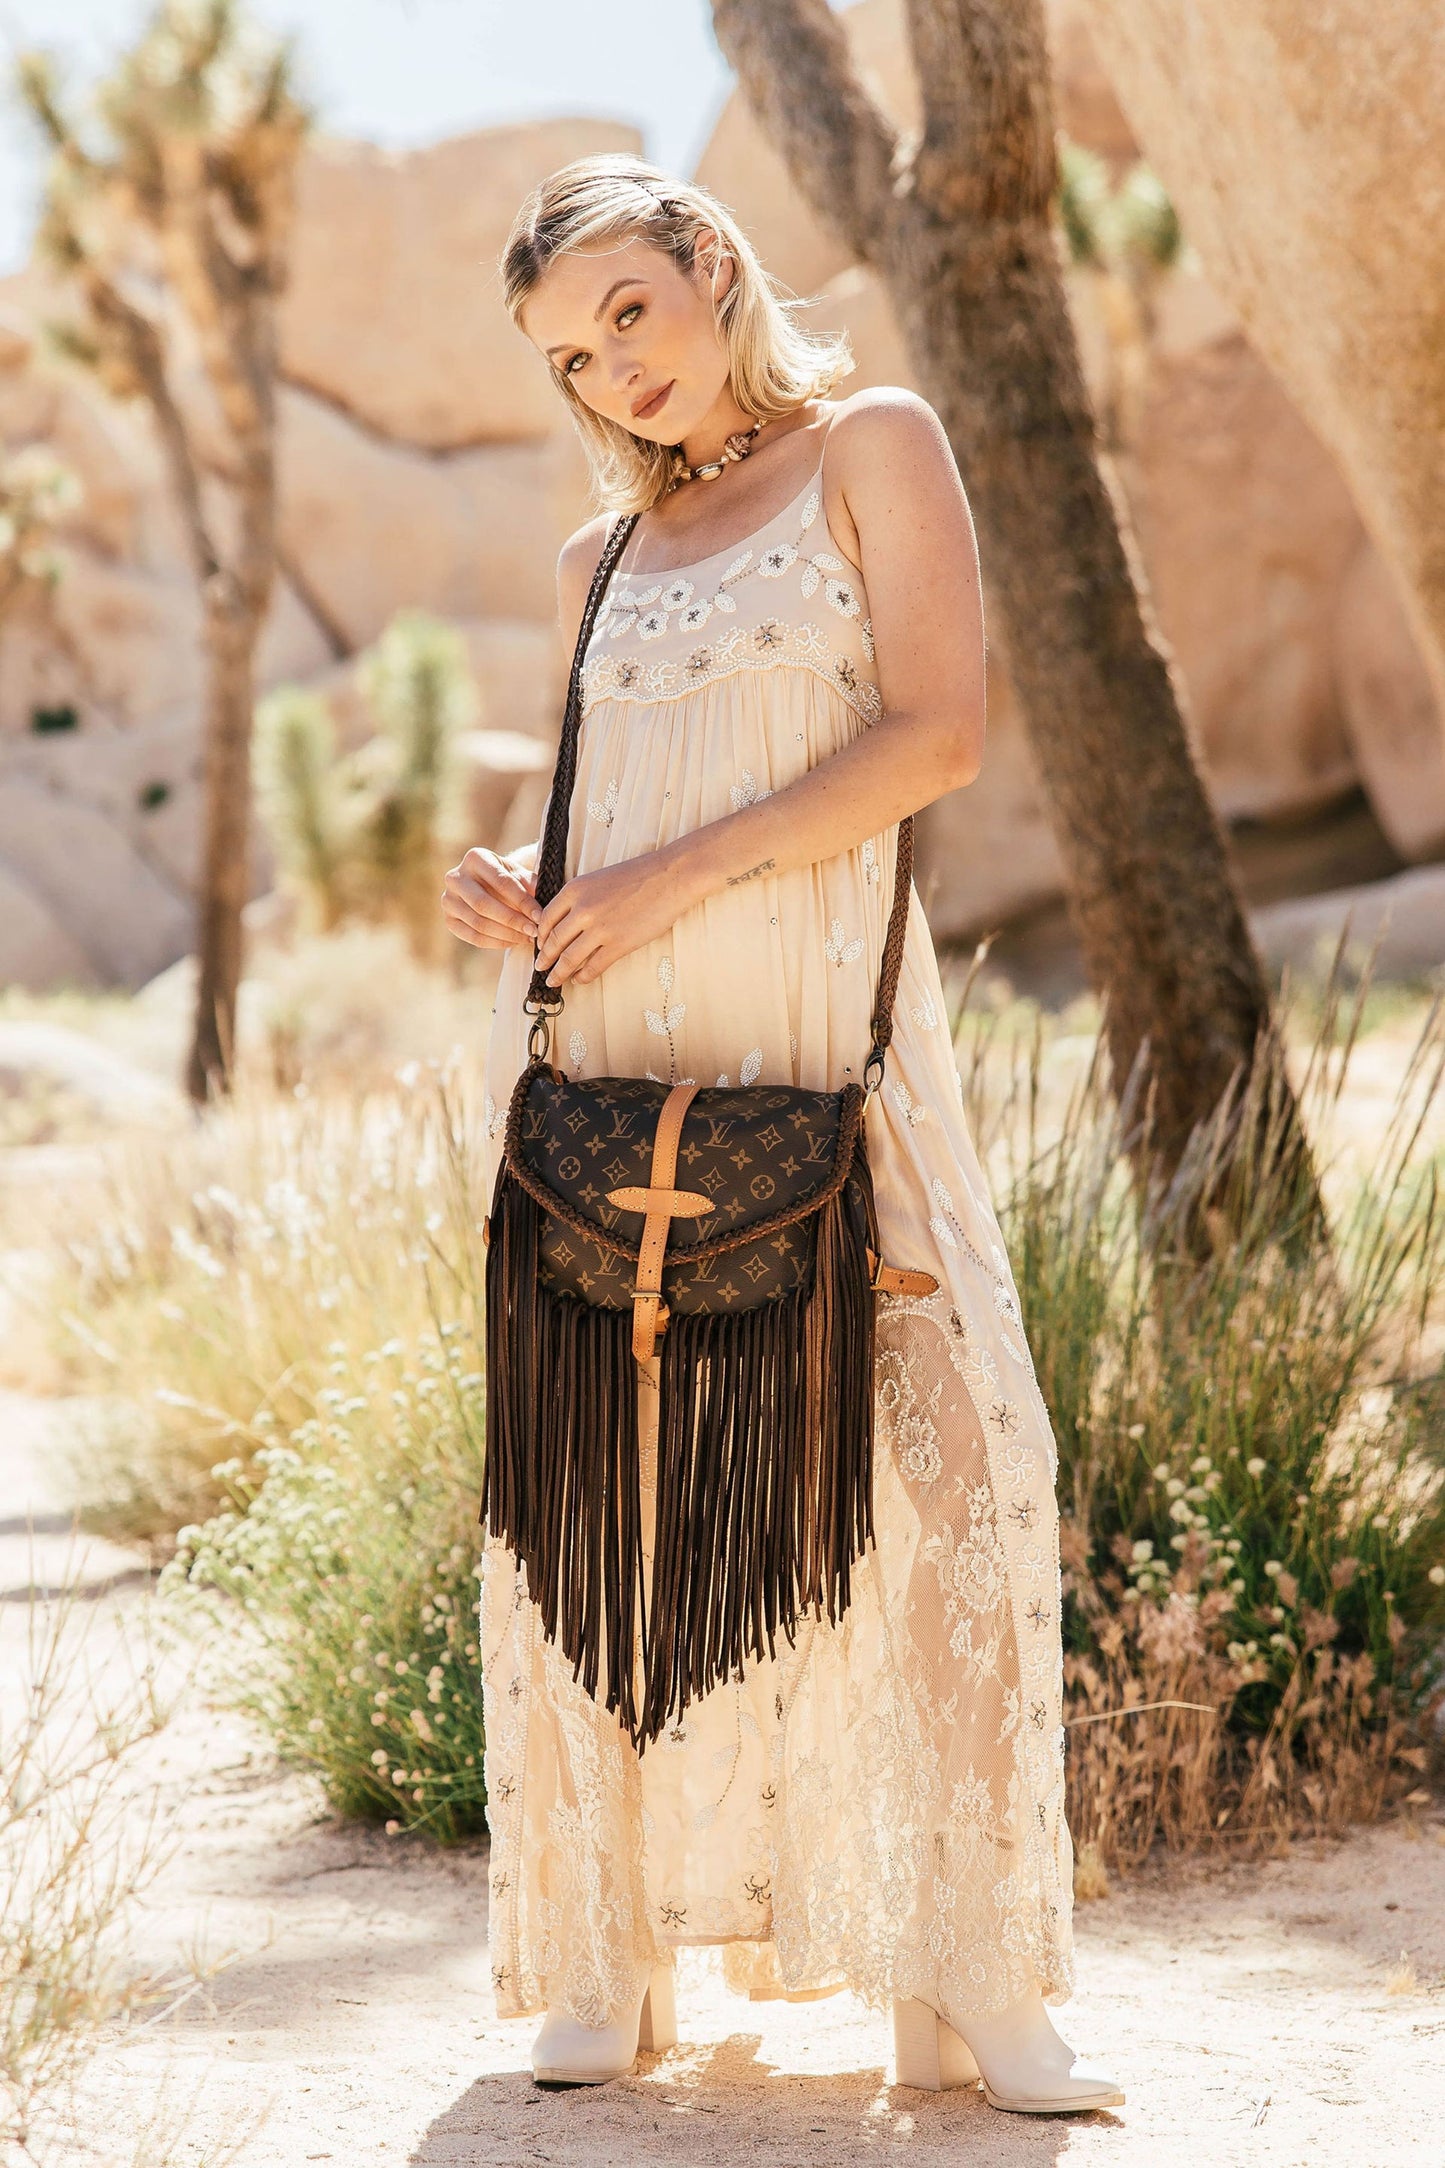 Full Store Catalog – Page 2 – Vintage Boho Bags